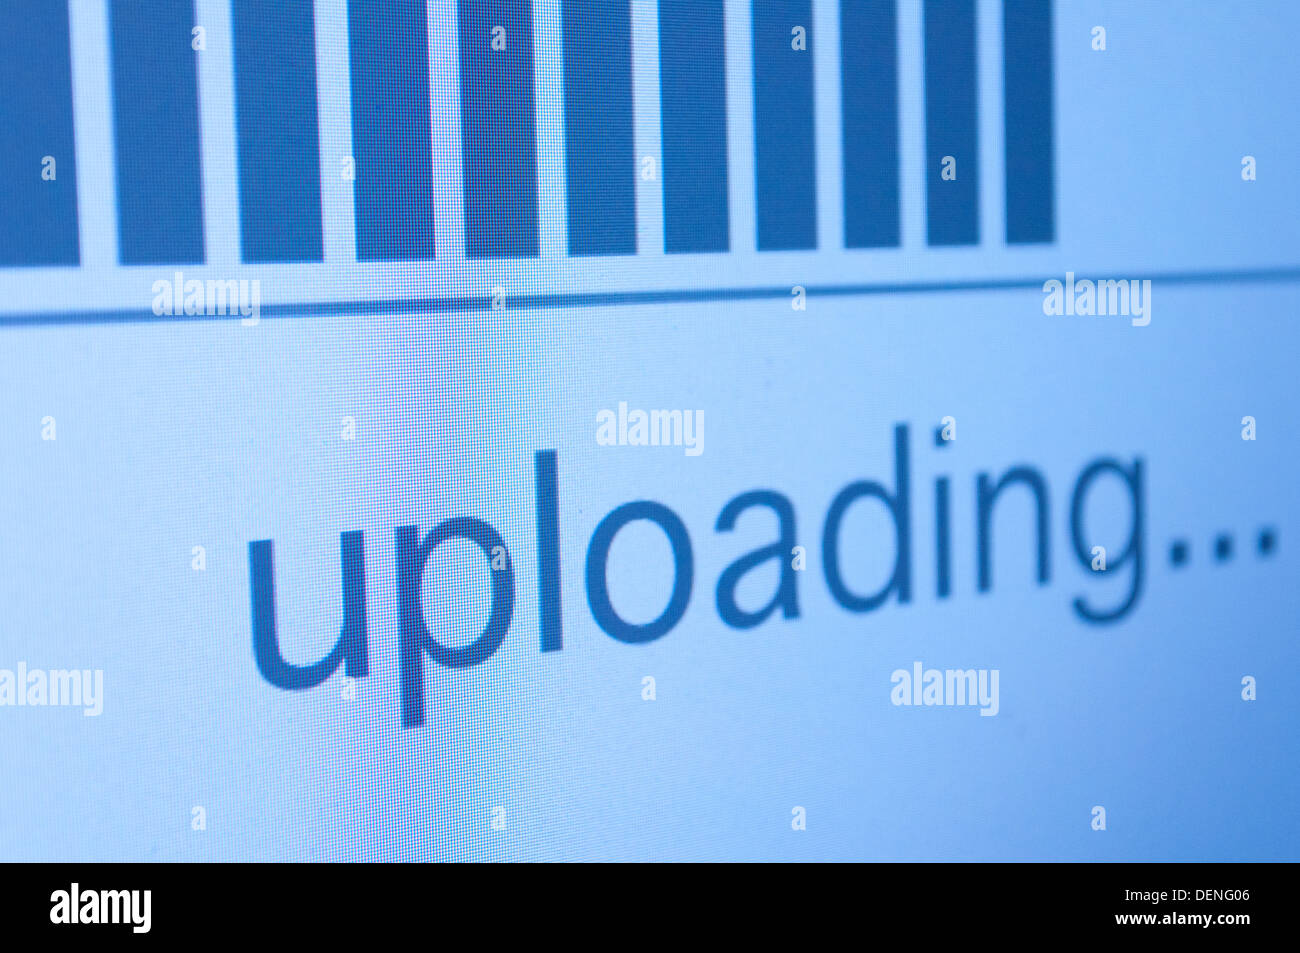 Closeup of Upload Process Bar on LCD Screen - Shallow Depth of Field Stock Photo